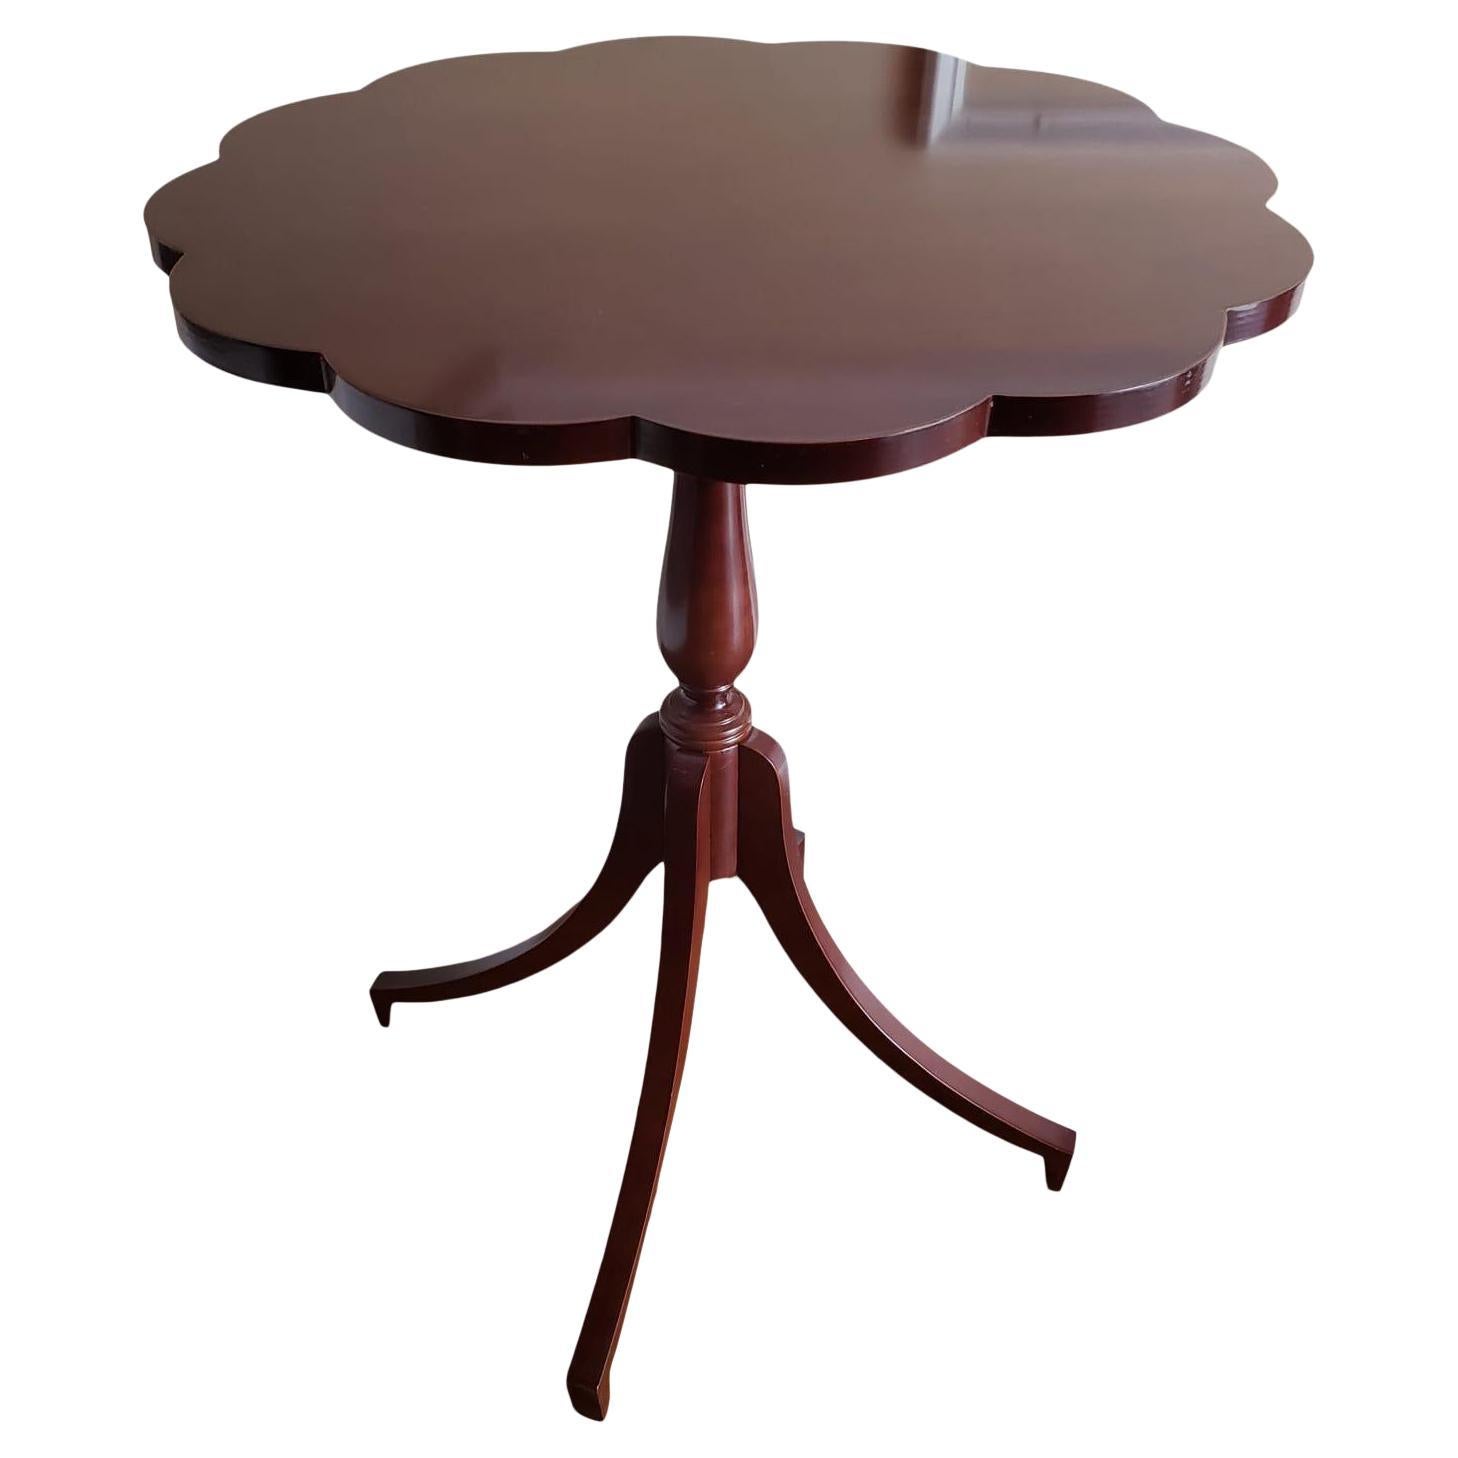 Bombay Mahogany Stained Wood Scallop Edge Accent Table, Circa 1993